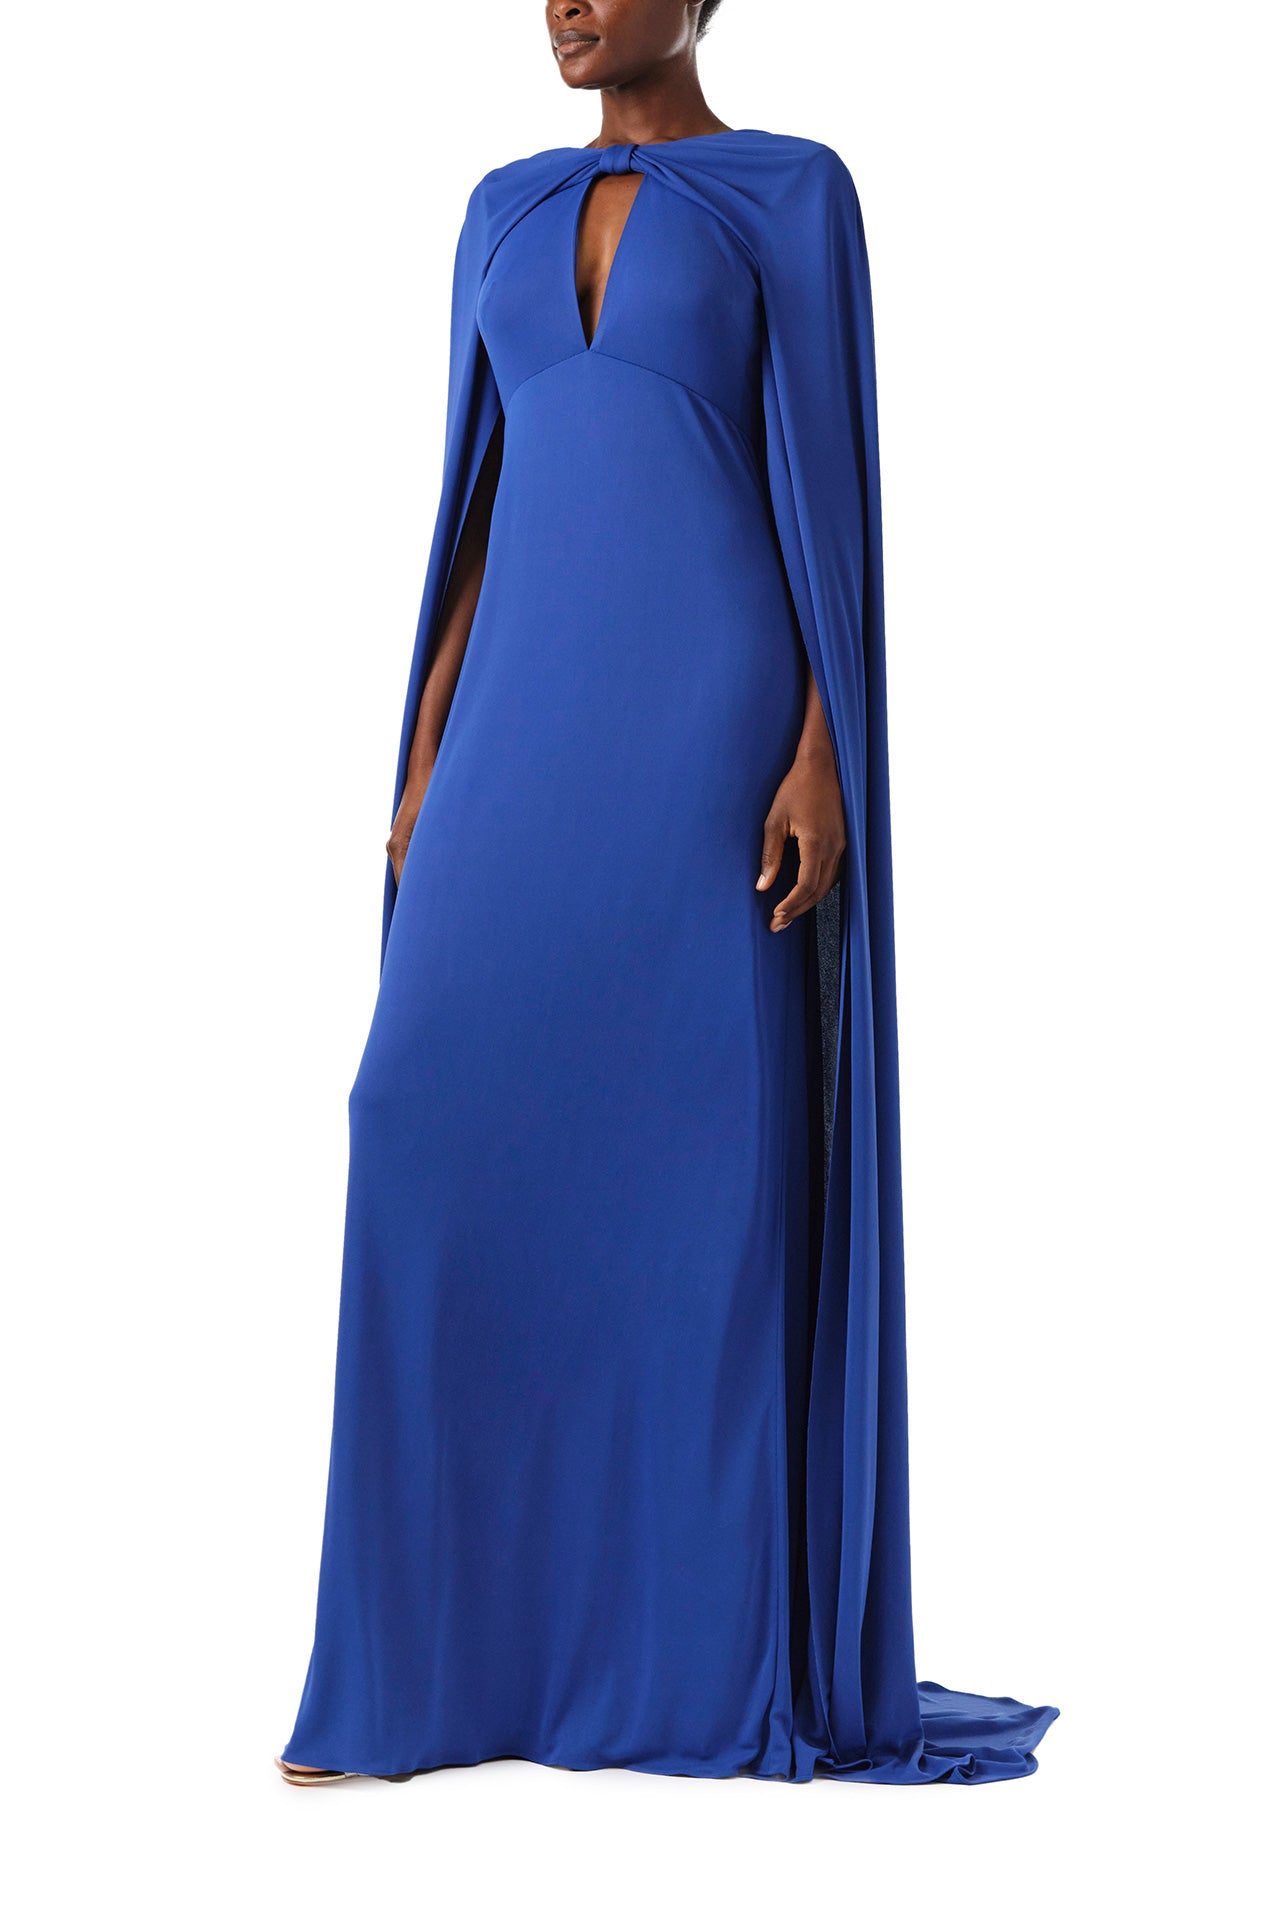 Monique Lhuillier Spring 2024 royal blue crepe-back satin gown with attached cape and keyhole bodice - left.